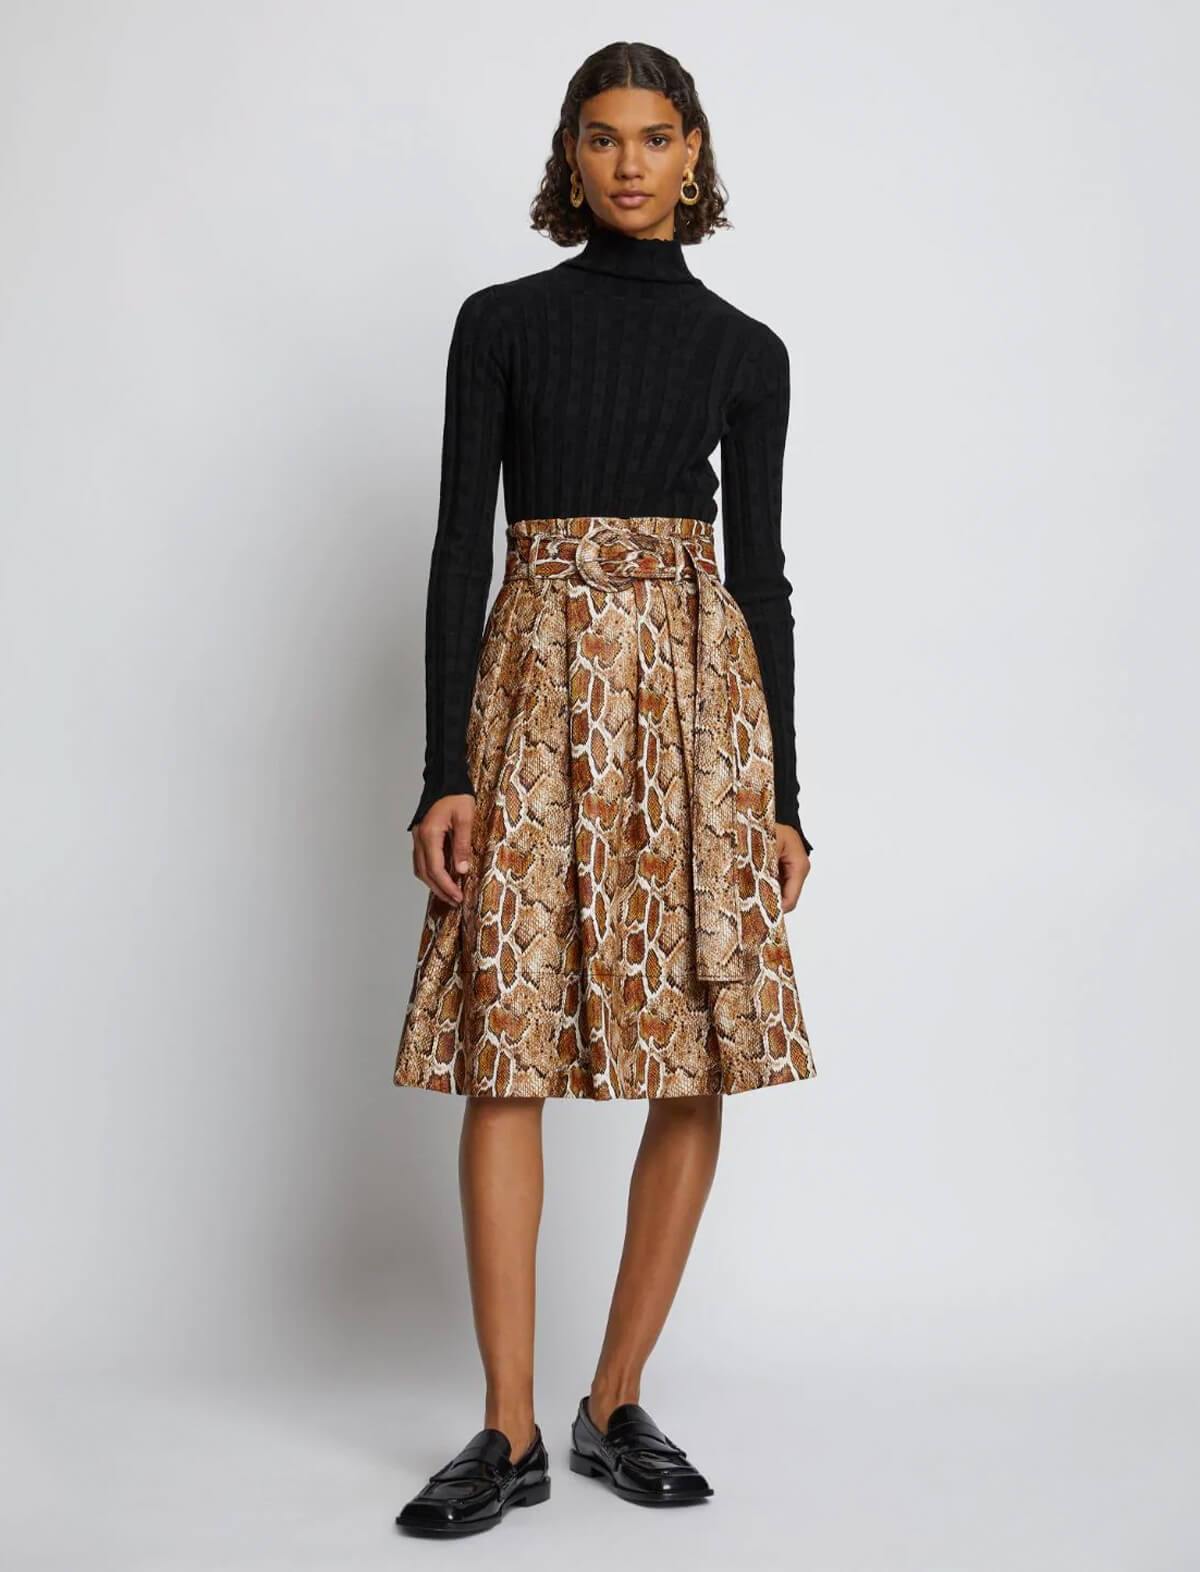 PROENZA SCHOULER WHITE LABEL Pleated Skirt in Cider Snake Print | CLOSET Singapore